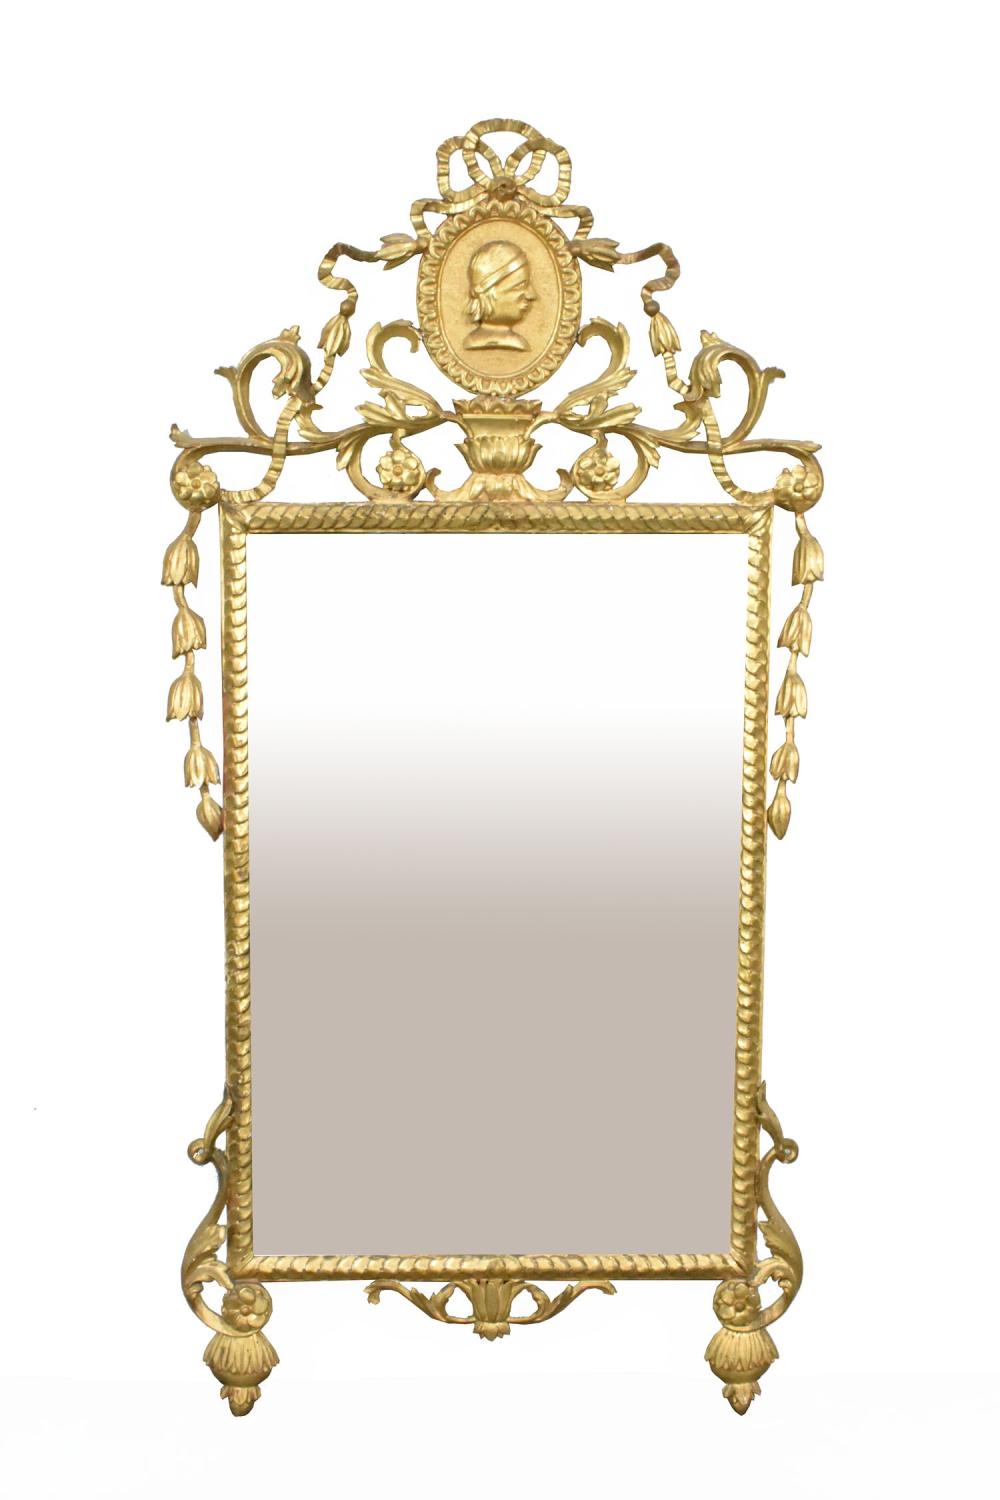 ANTIQUE GILTWOOD CARVED MIRROR  2f87b9